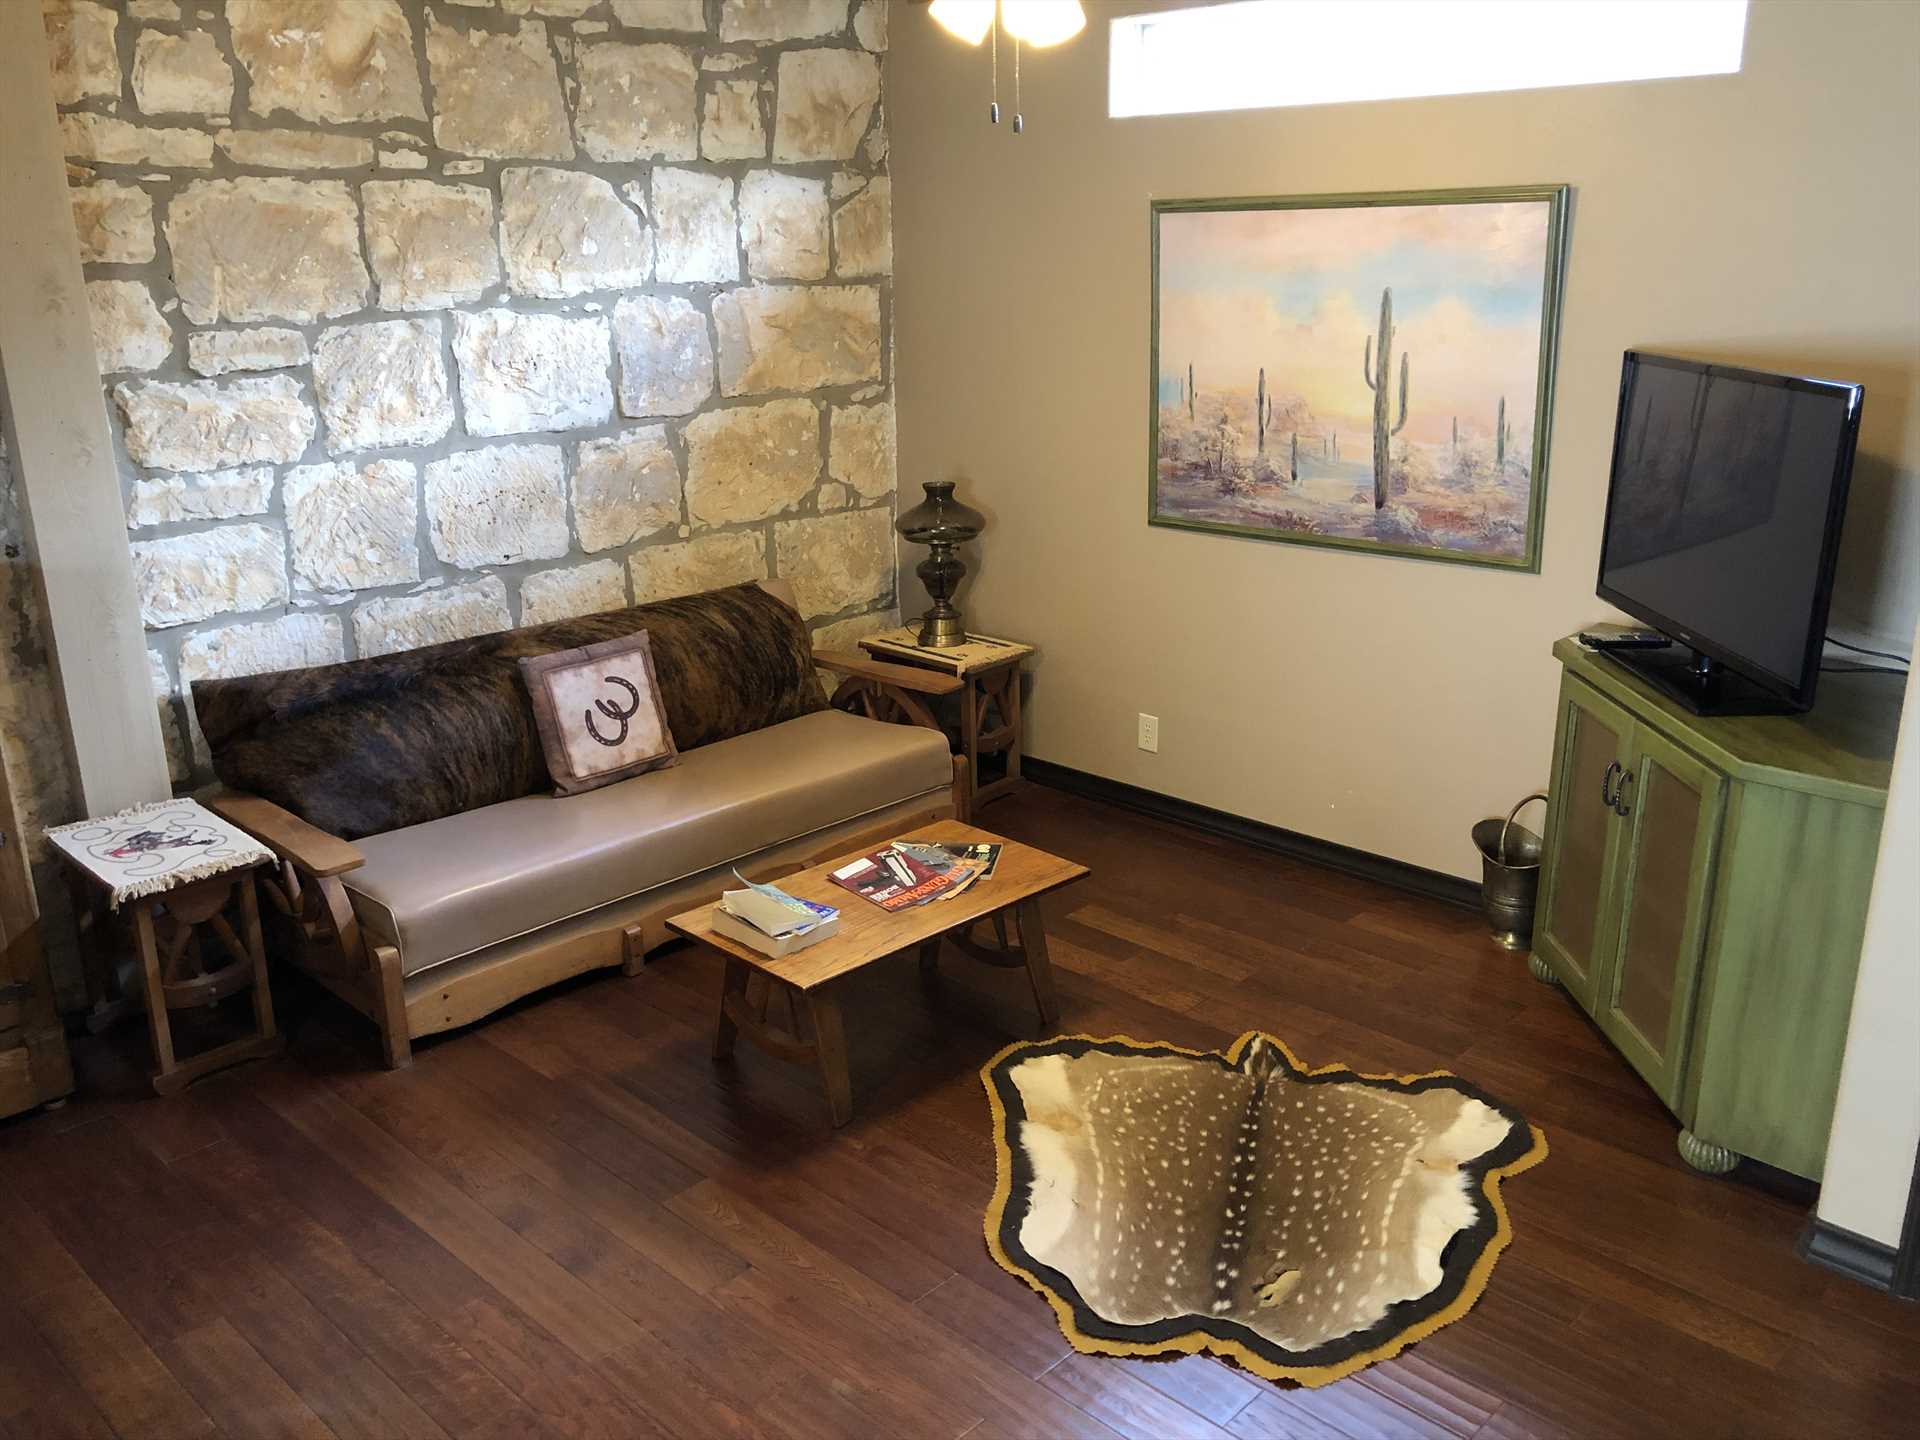                                                 The living area evokes the history of the American cowboy, right at home in the Cowboy Capital of the World!